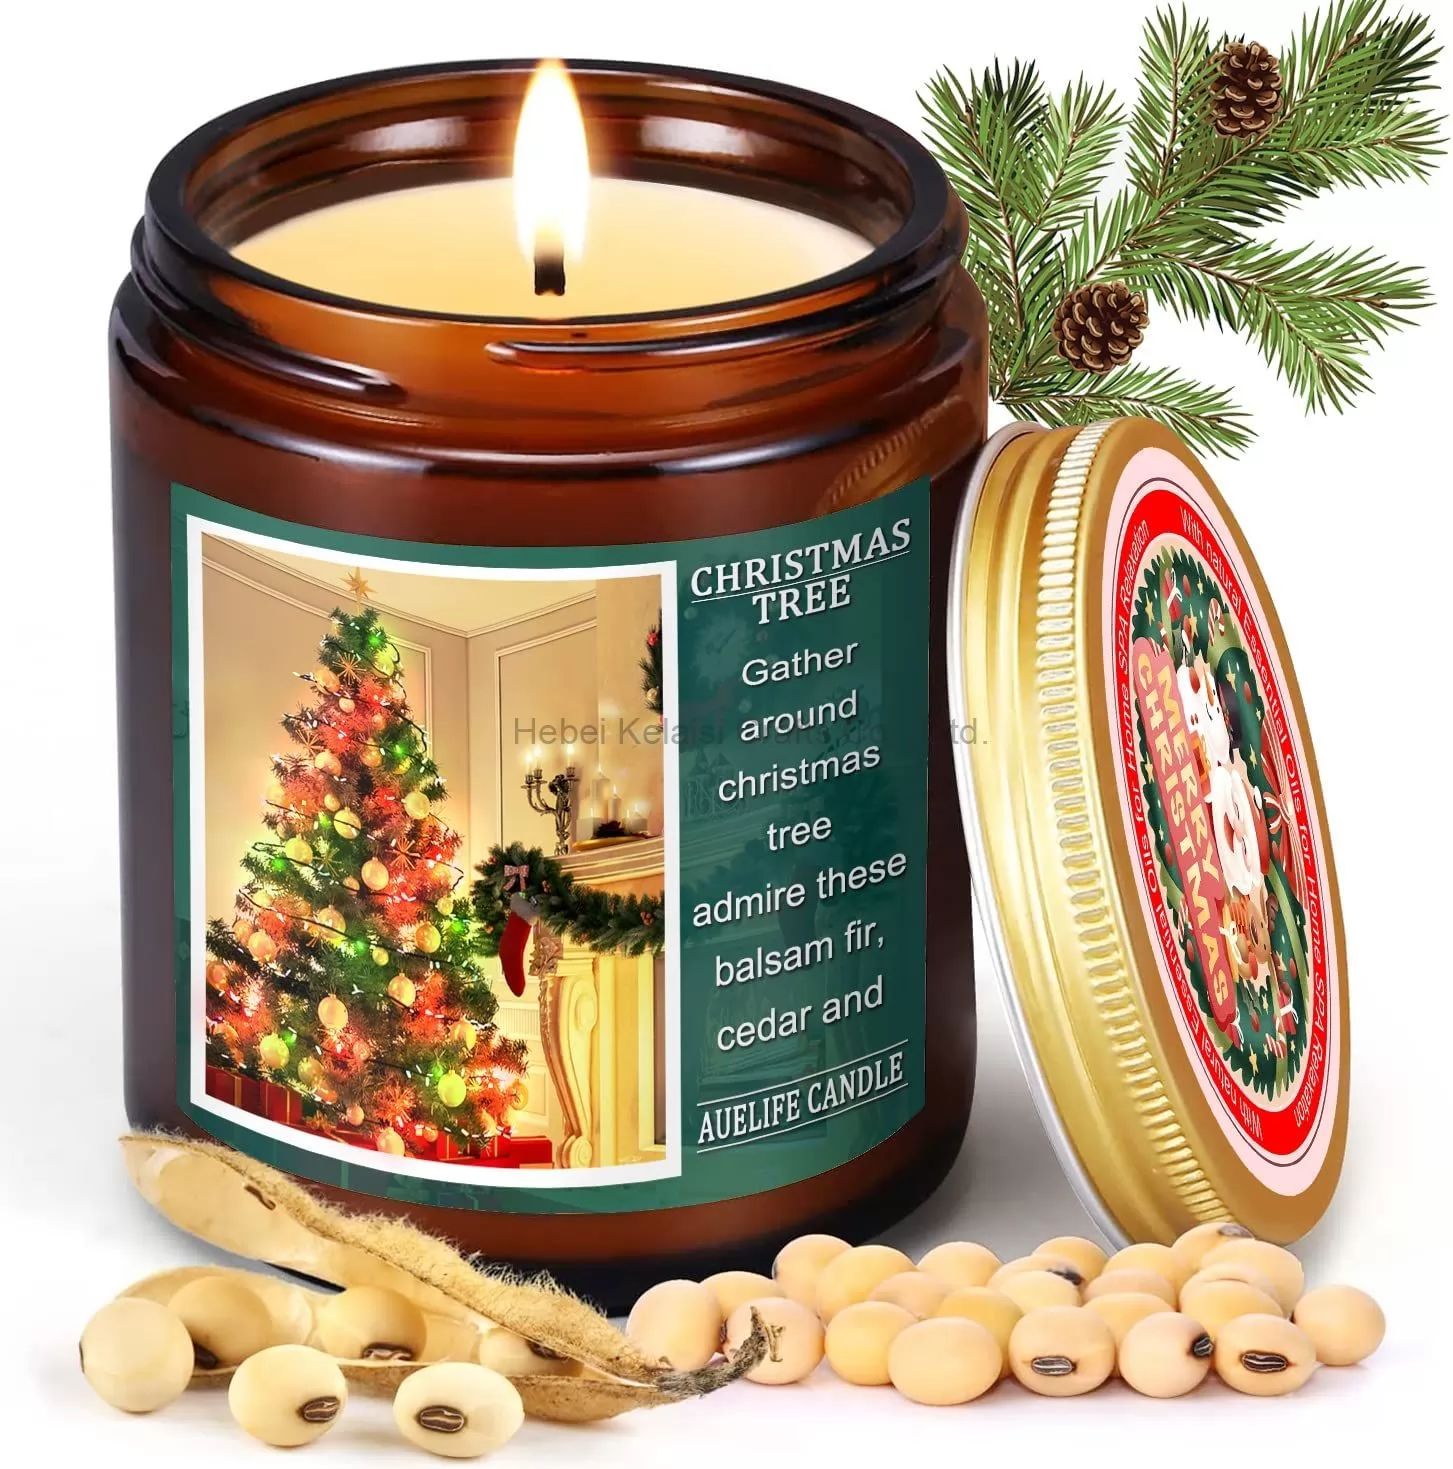 7oz Balsam Fir Cedar Holly and Evergreen Holiday Scented Candles